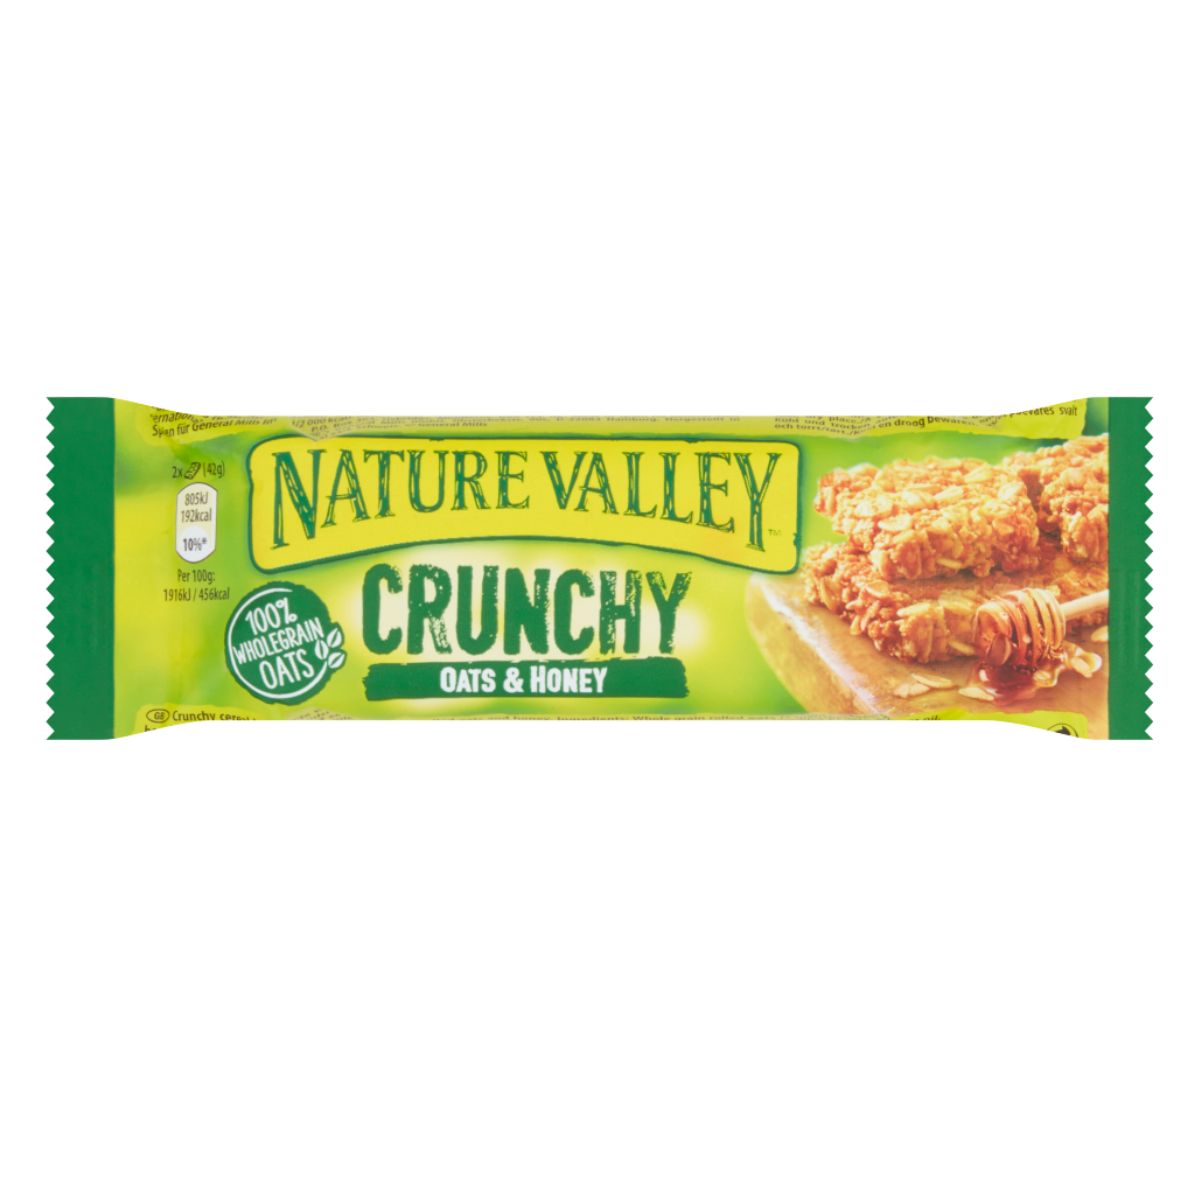 Packaged Nature Valley - Crunchy Oats & Honey - 42g granola bar with an image of the bar on the wrapper.